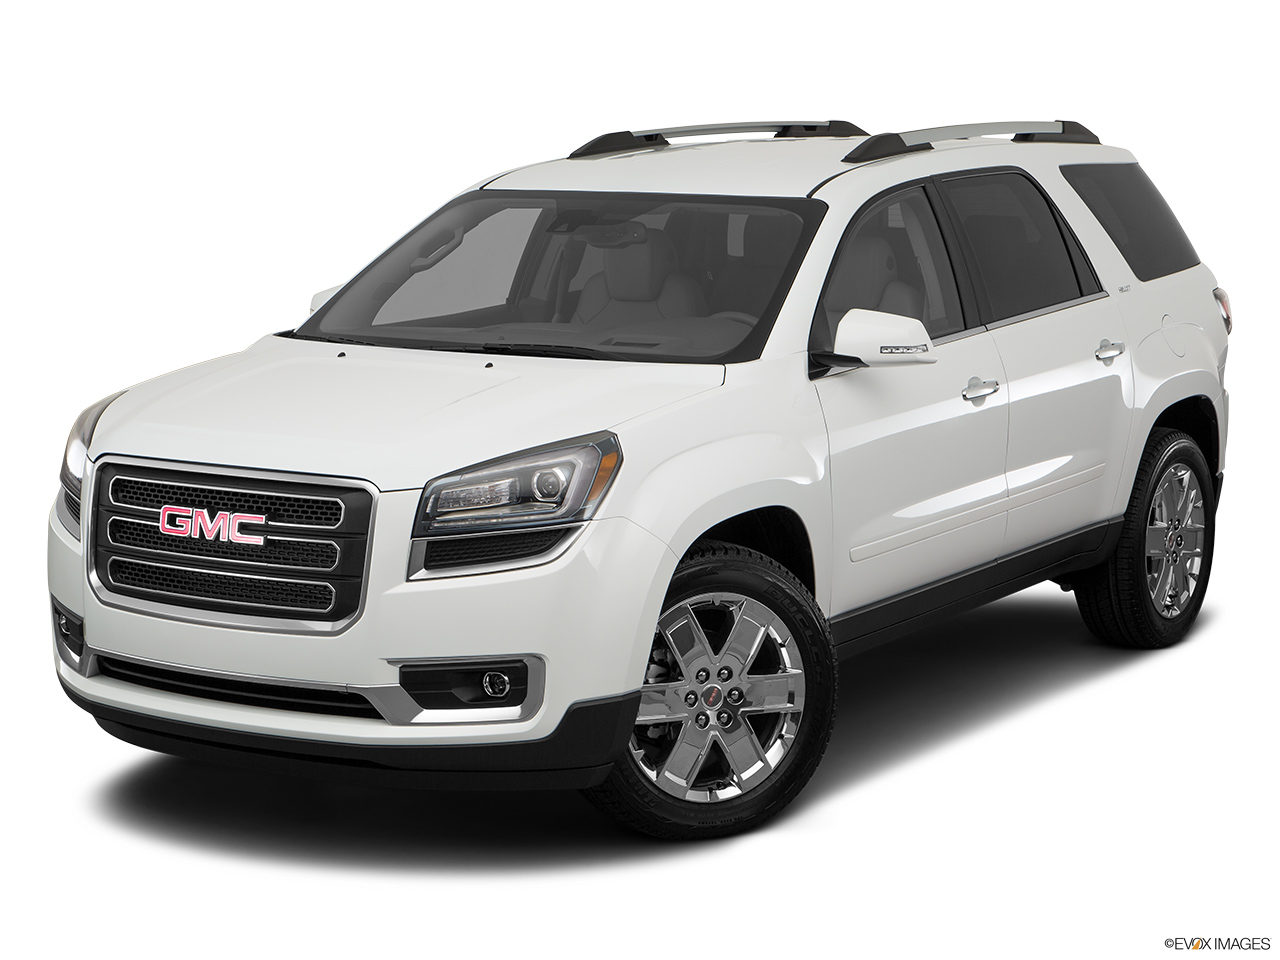 2017 GMC Acadia Limited SLT Front angle view. 